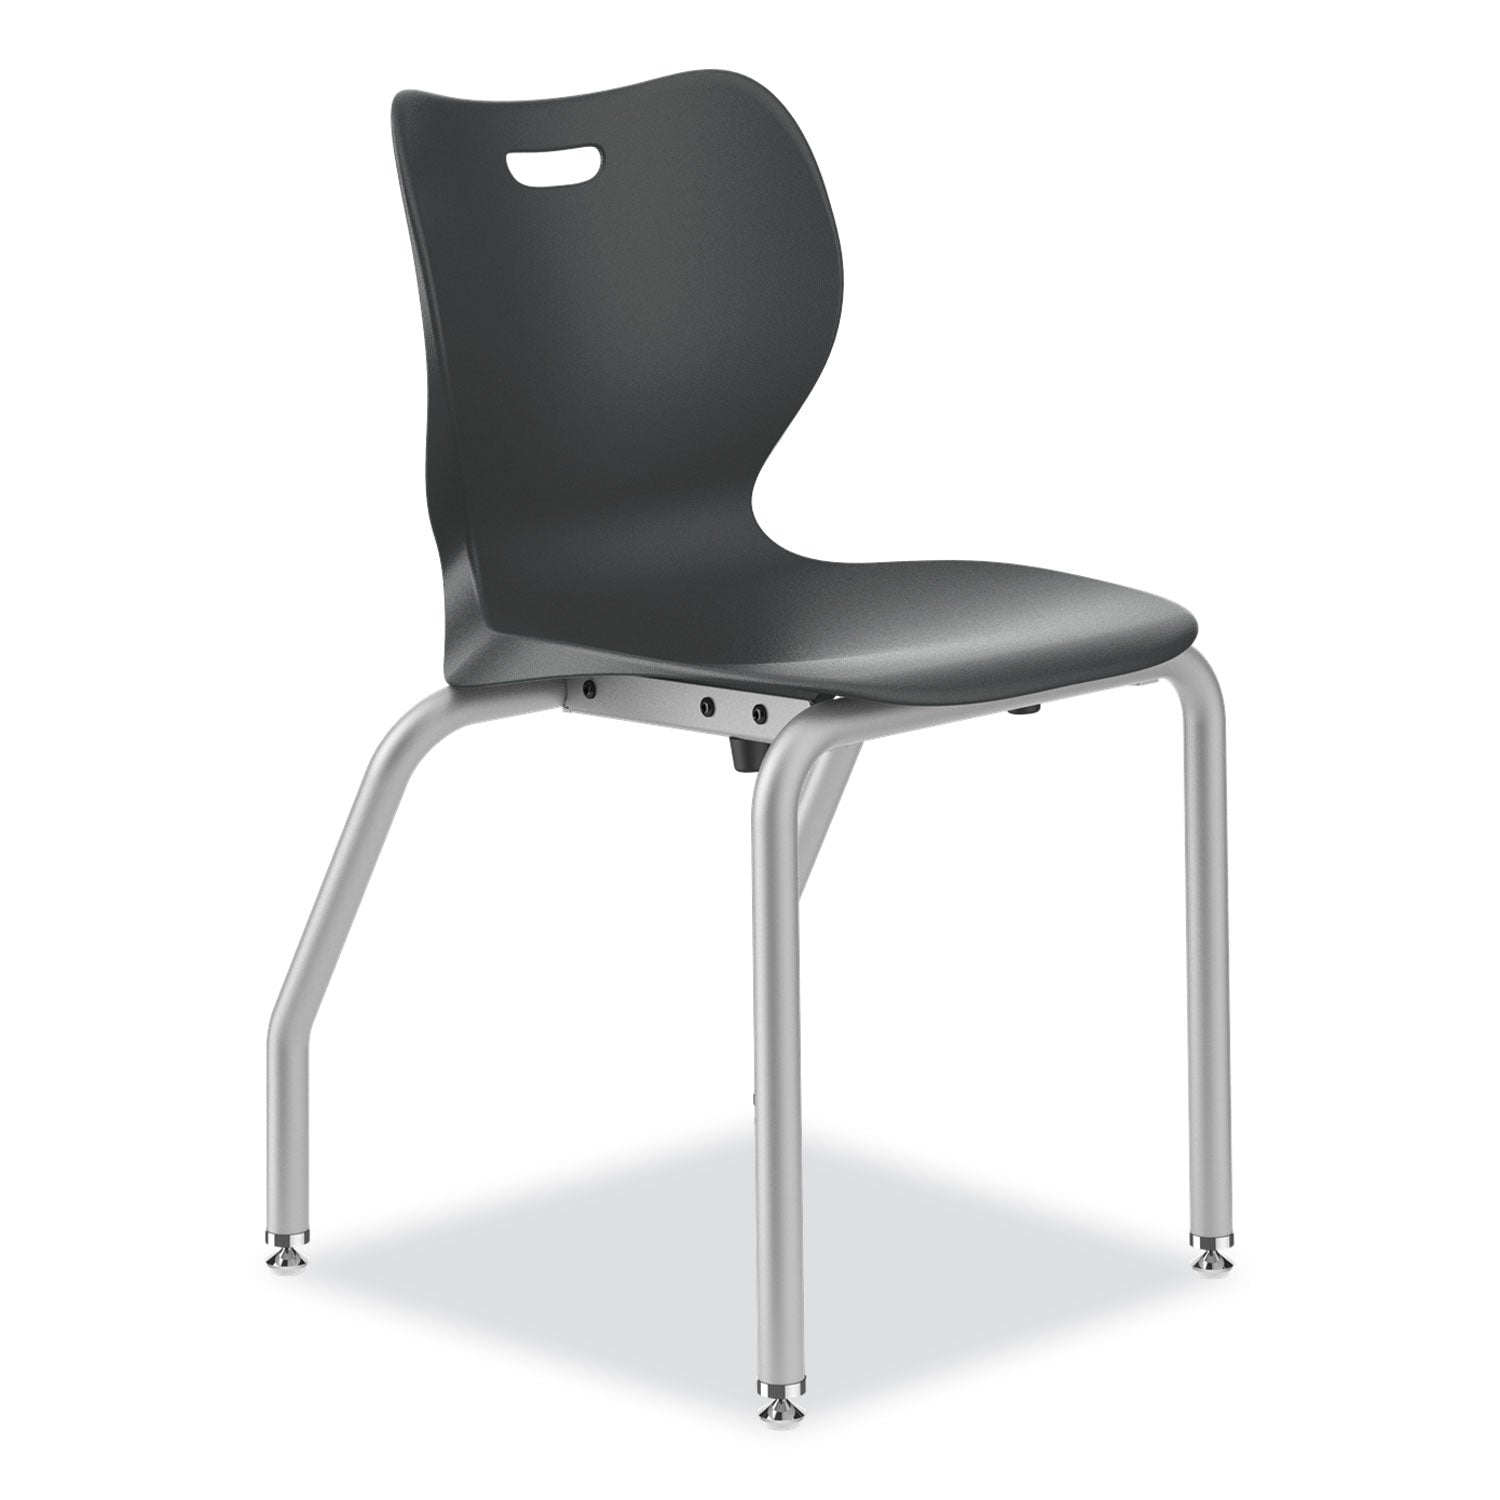 smartlink-four-leg-chair-supports-up-to-275-lb-18-seat-height-lava-seat-back-platinum-base-ships-in-7-10-business-days_honsl4l18elap - 1